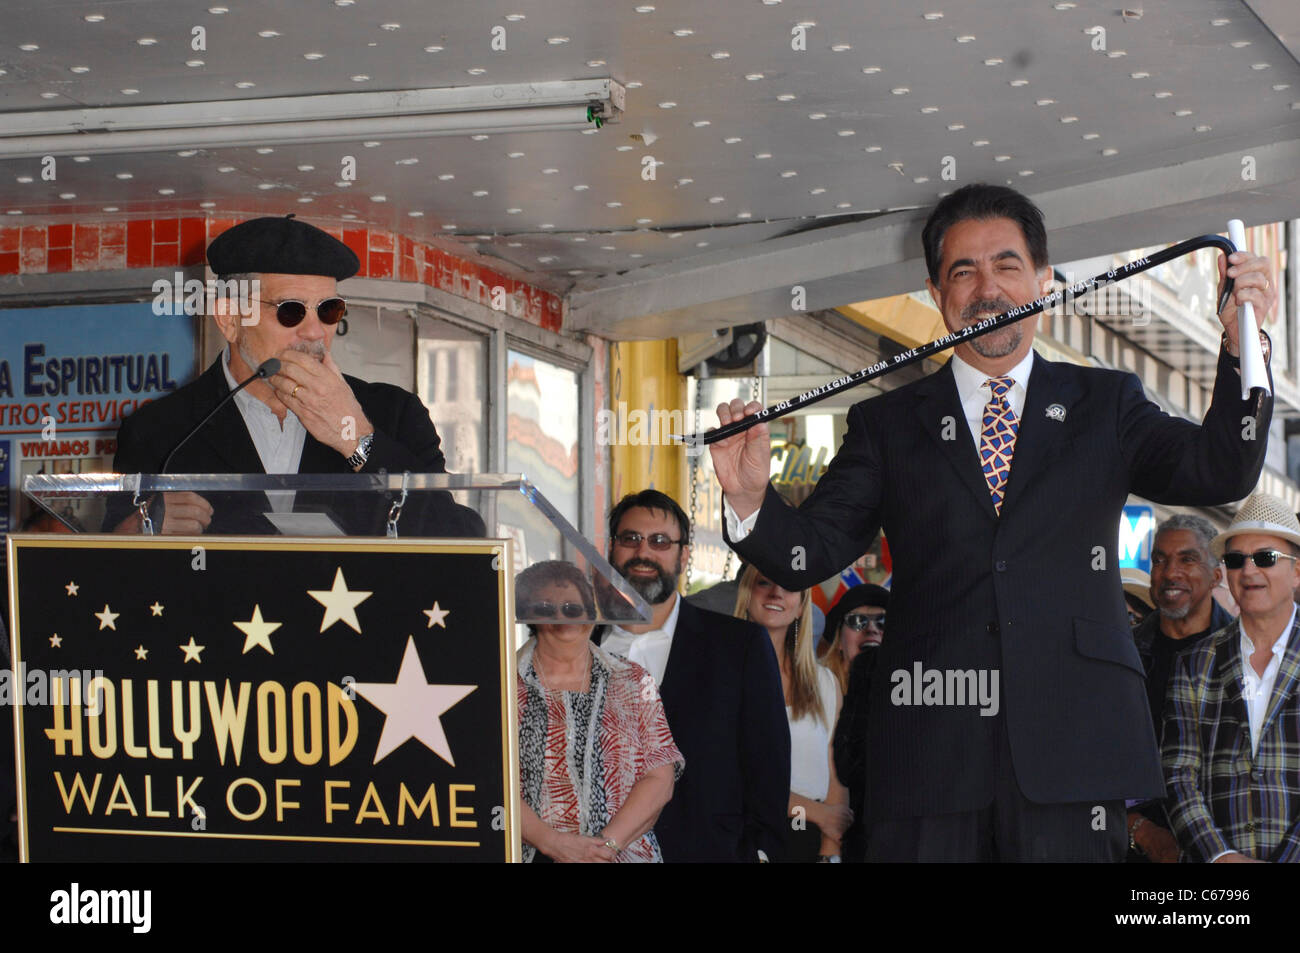 David Mamet, Joe Mantegna at the induction ceremony for Star on the Hollywood Walk of Fame Ceremony for Joe Mantegna, Hollywood Stock Photo